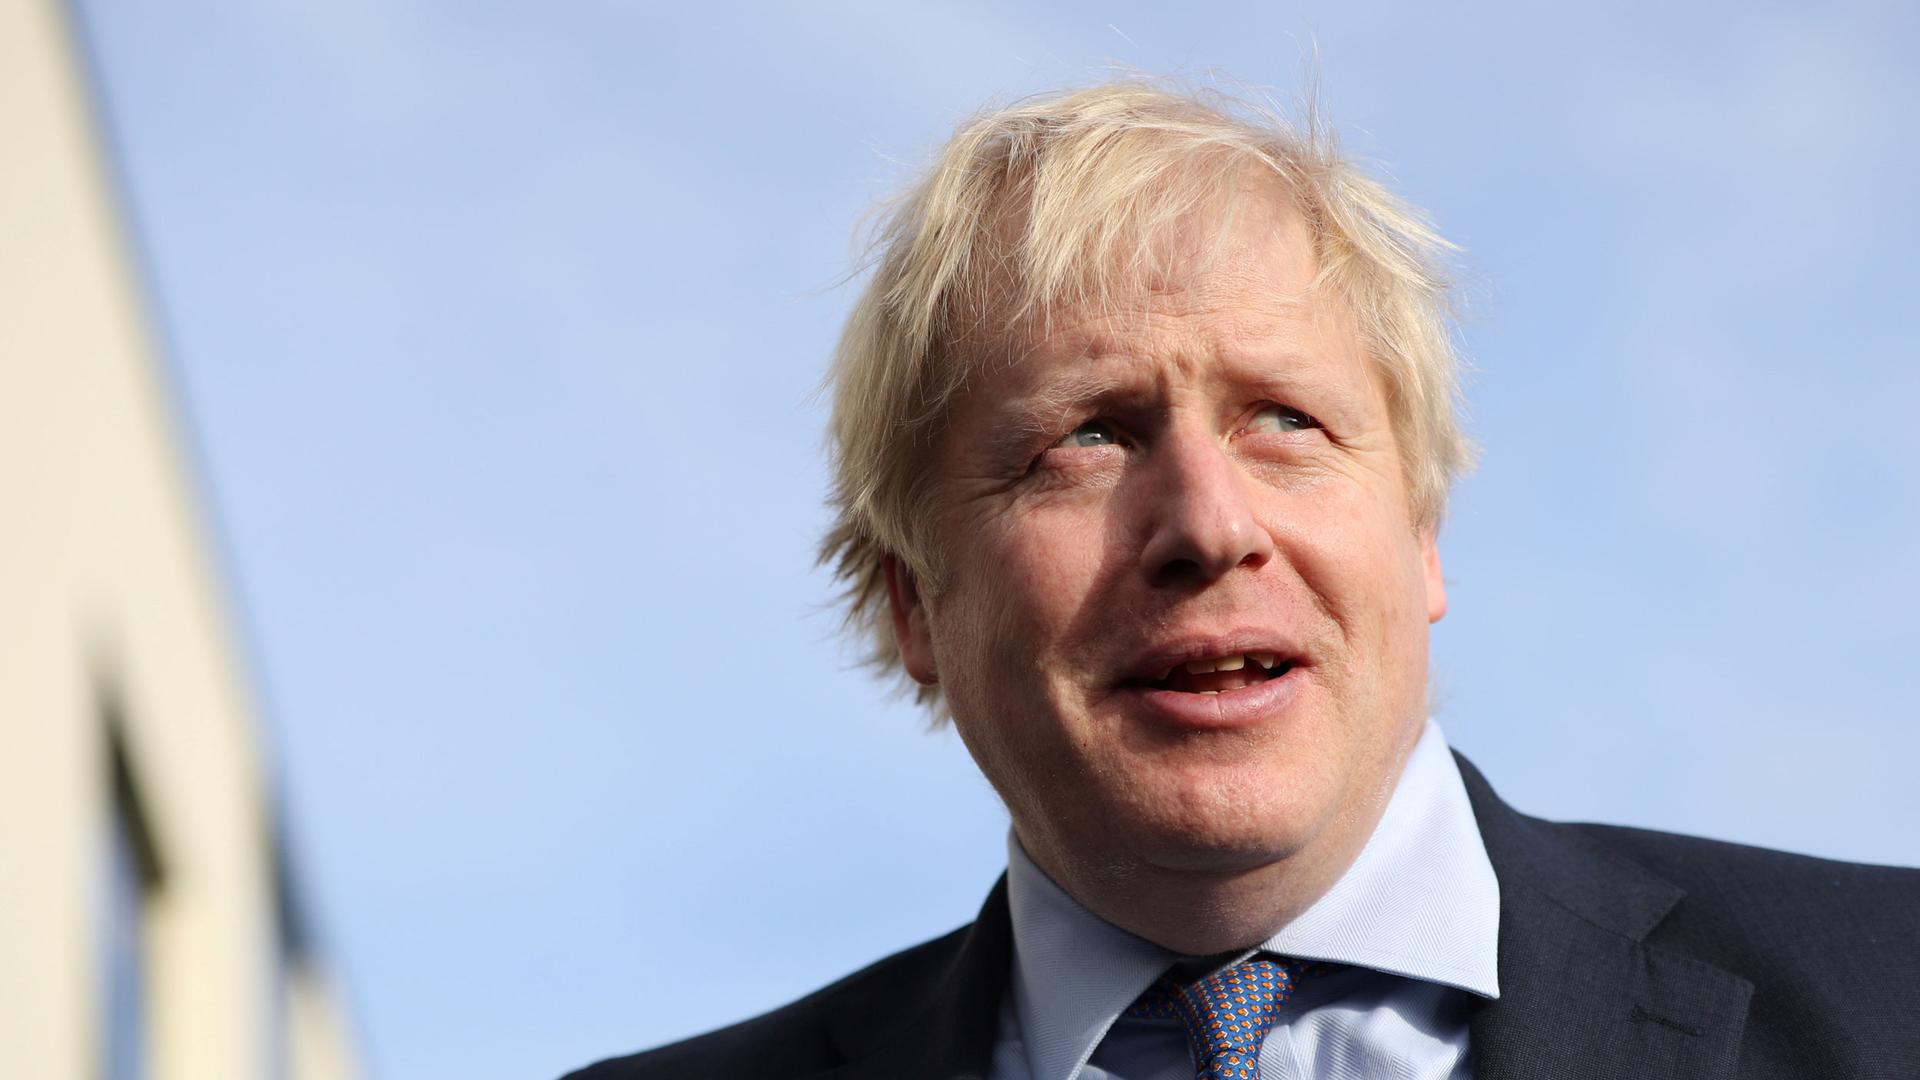 British Prime Minister Boris Johnson is shown in a close-up photo wearing a red and blue tie with a blue sky in the background.